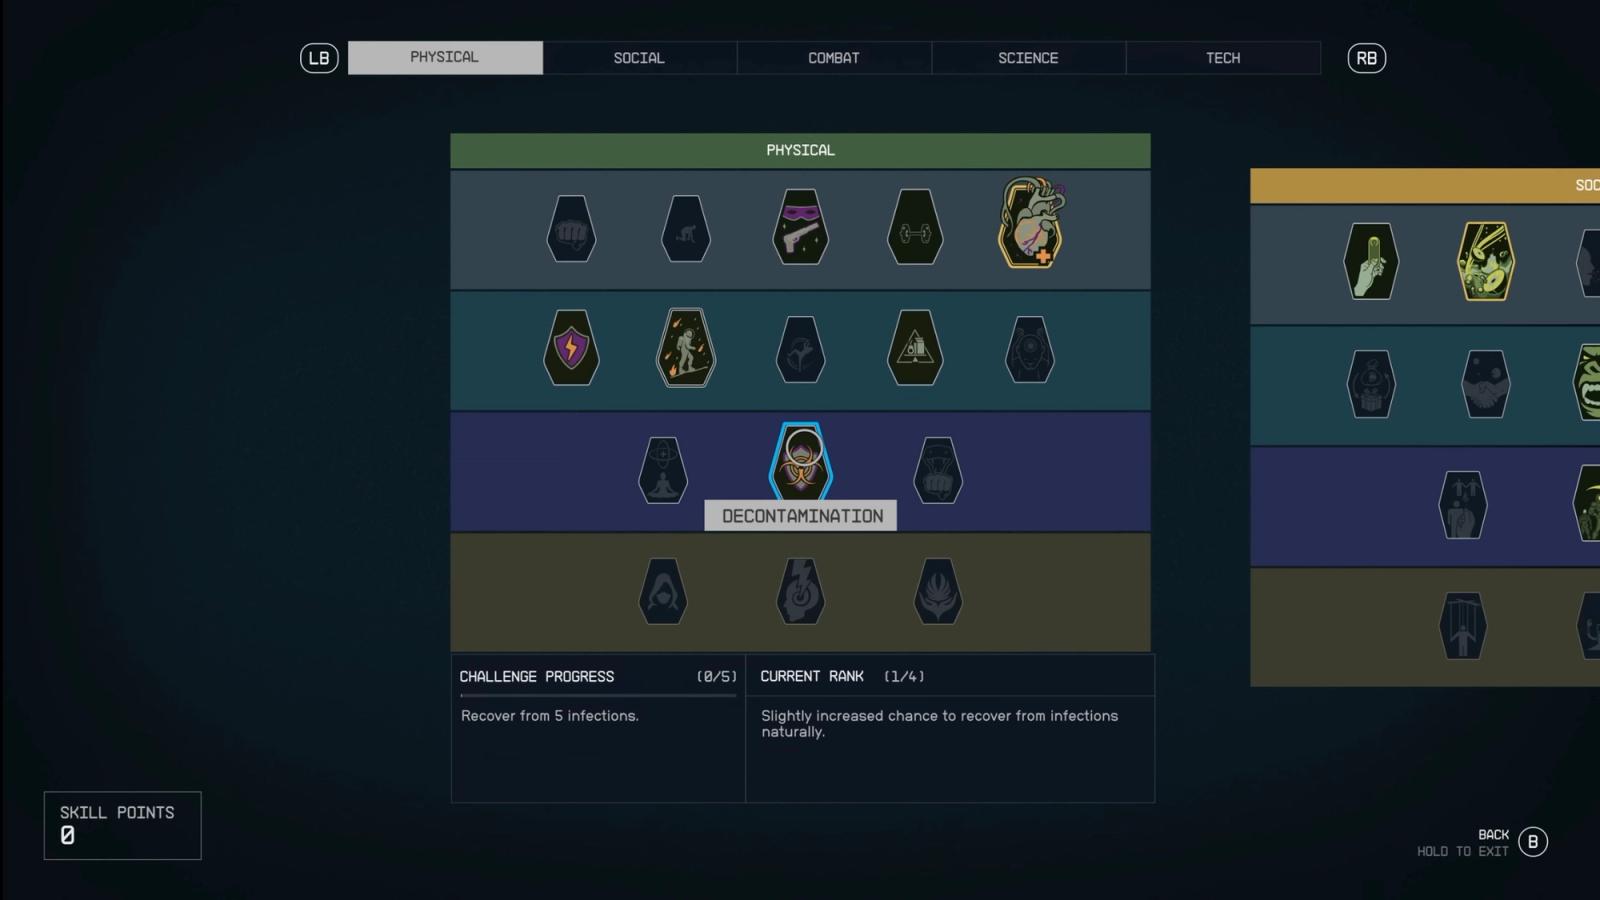 The physical skill tree is displayed